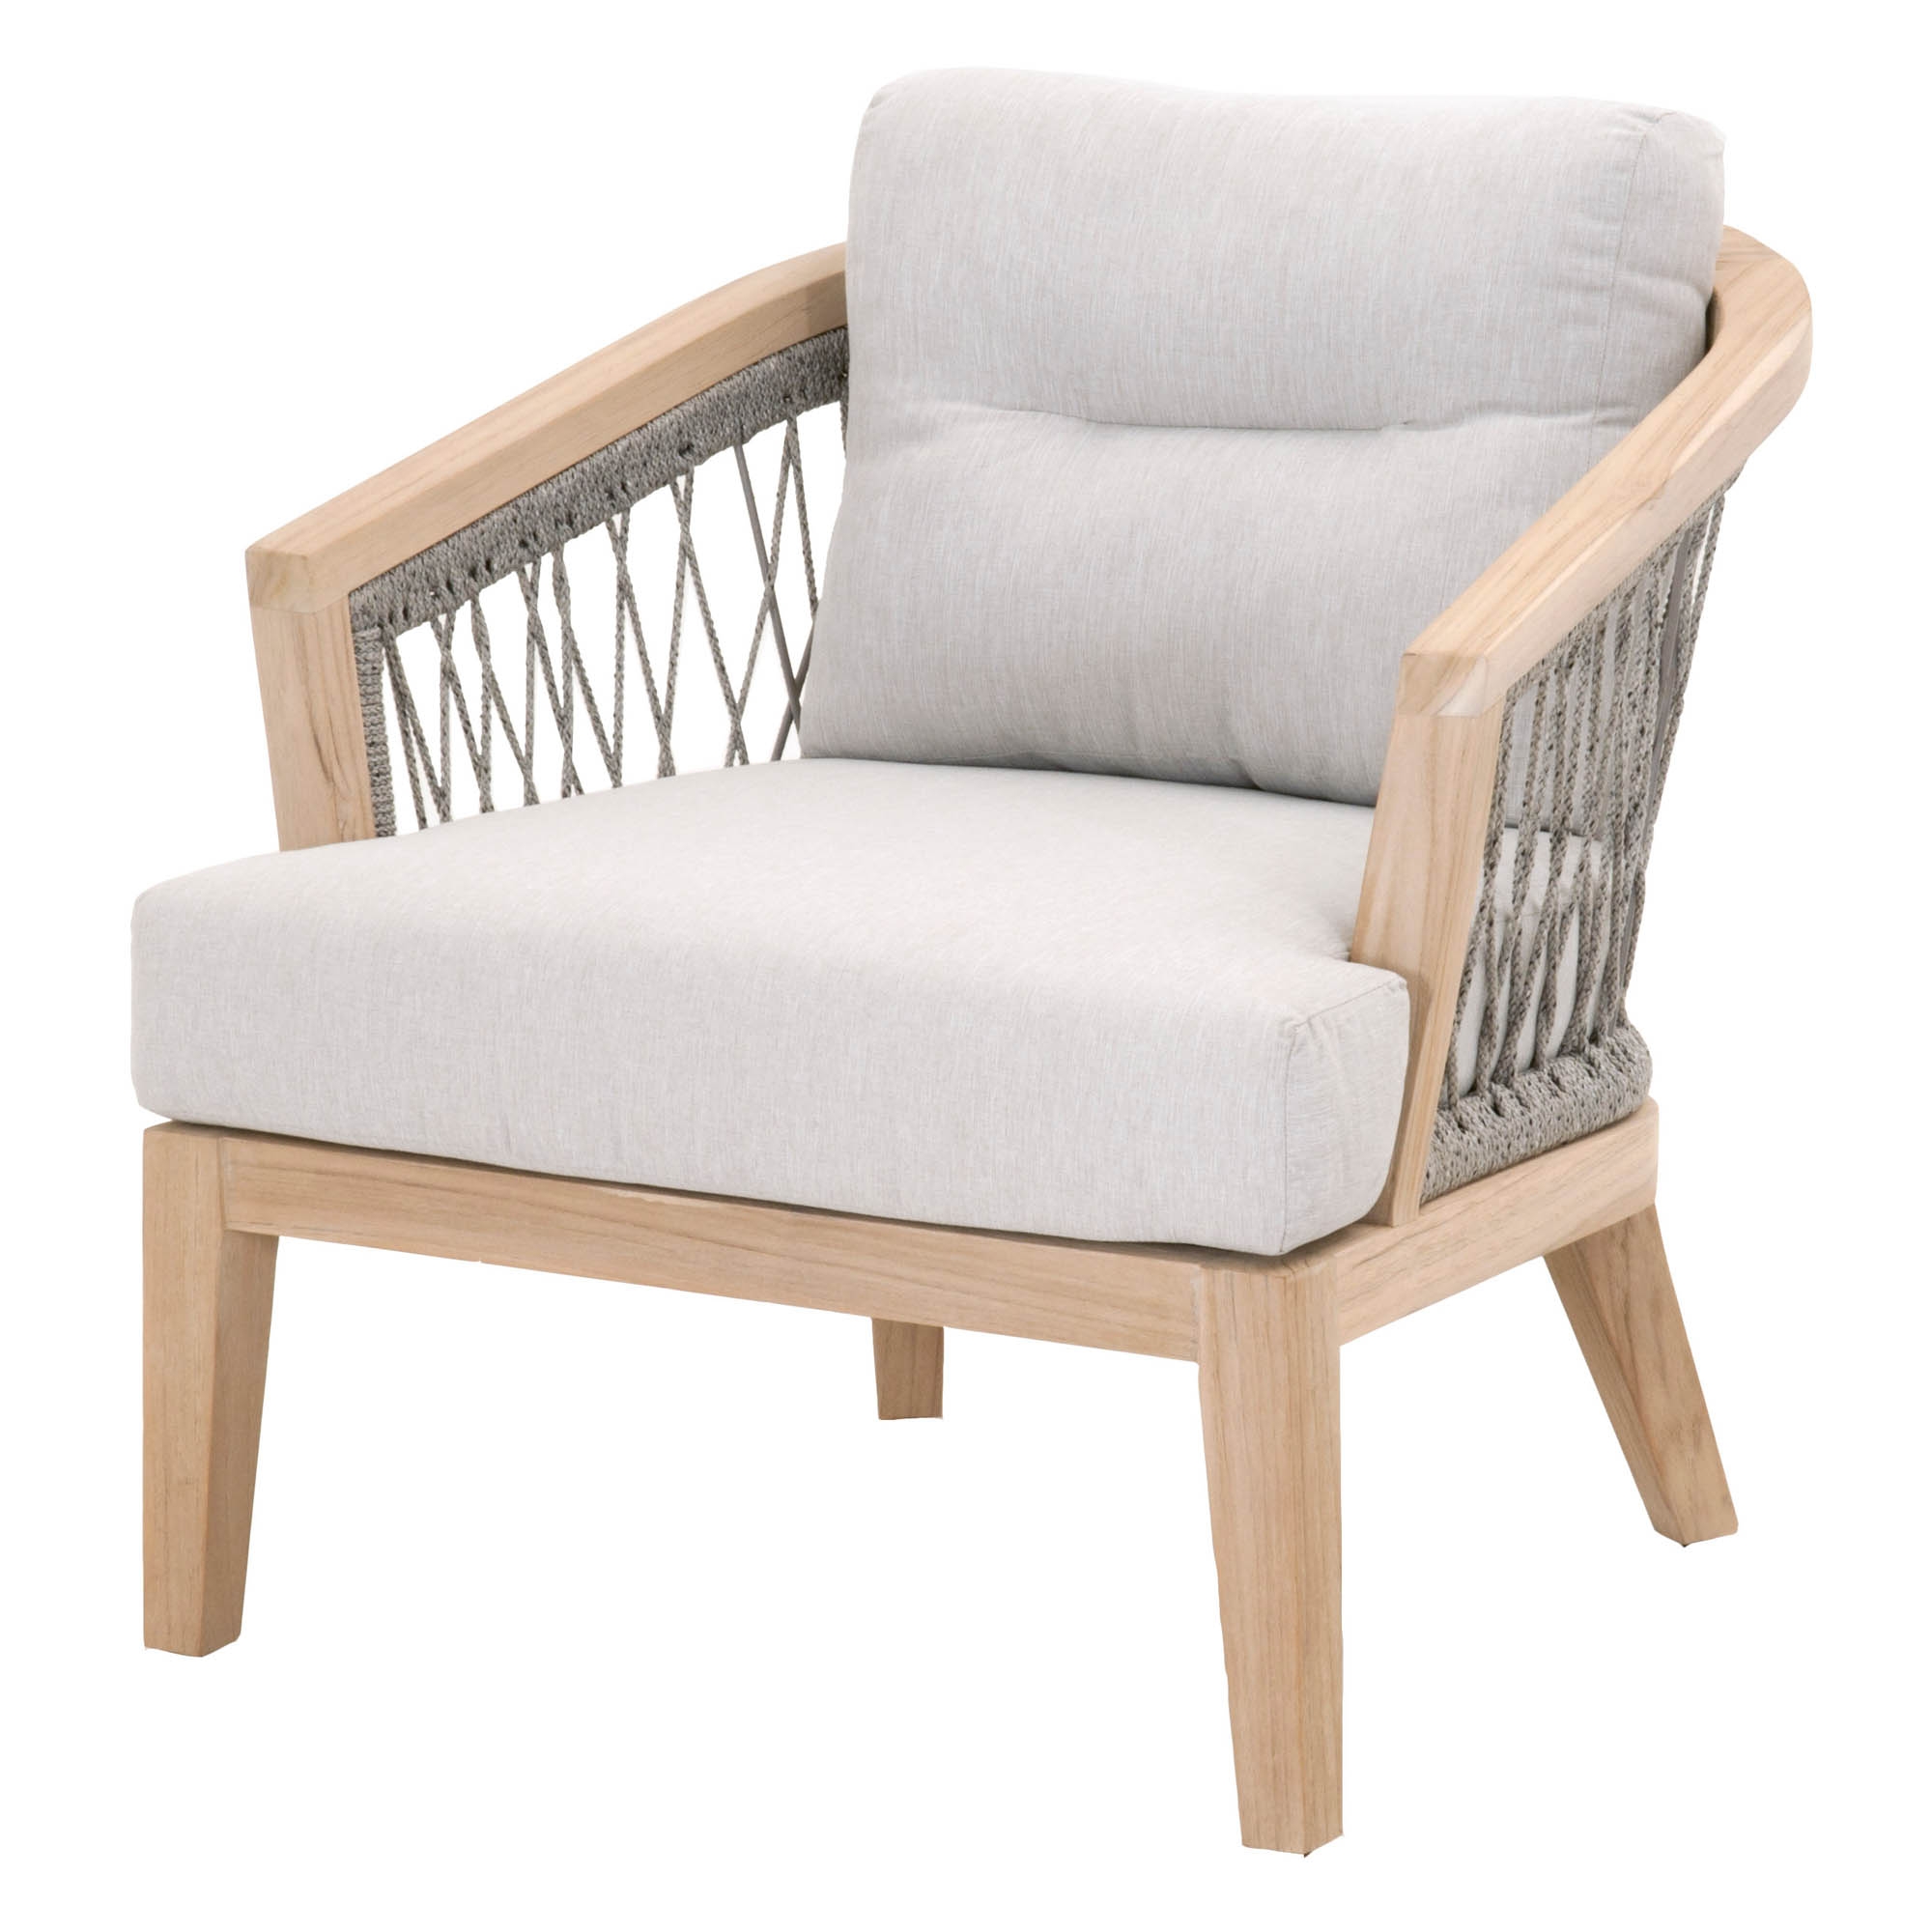 Web Outdoor Club Chair - Image 1